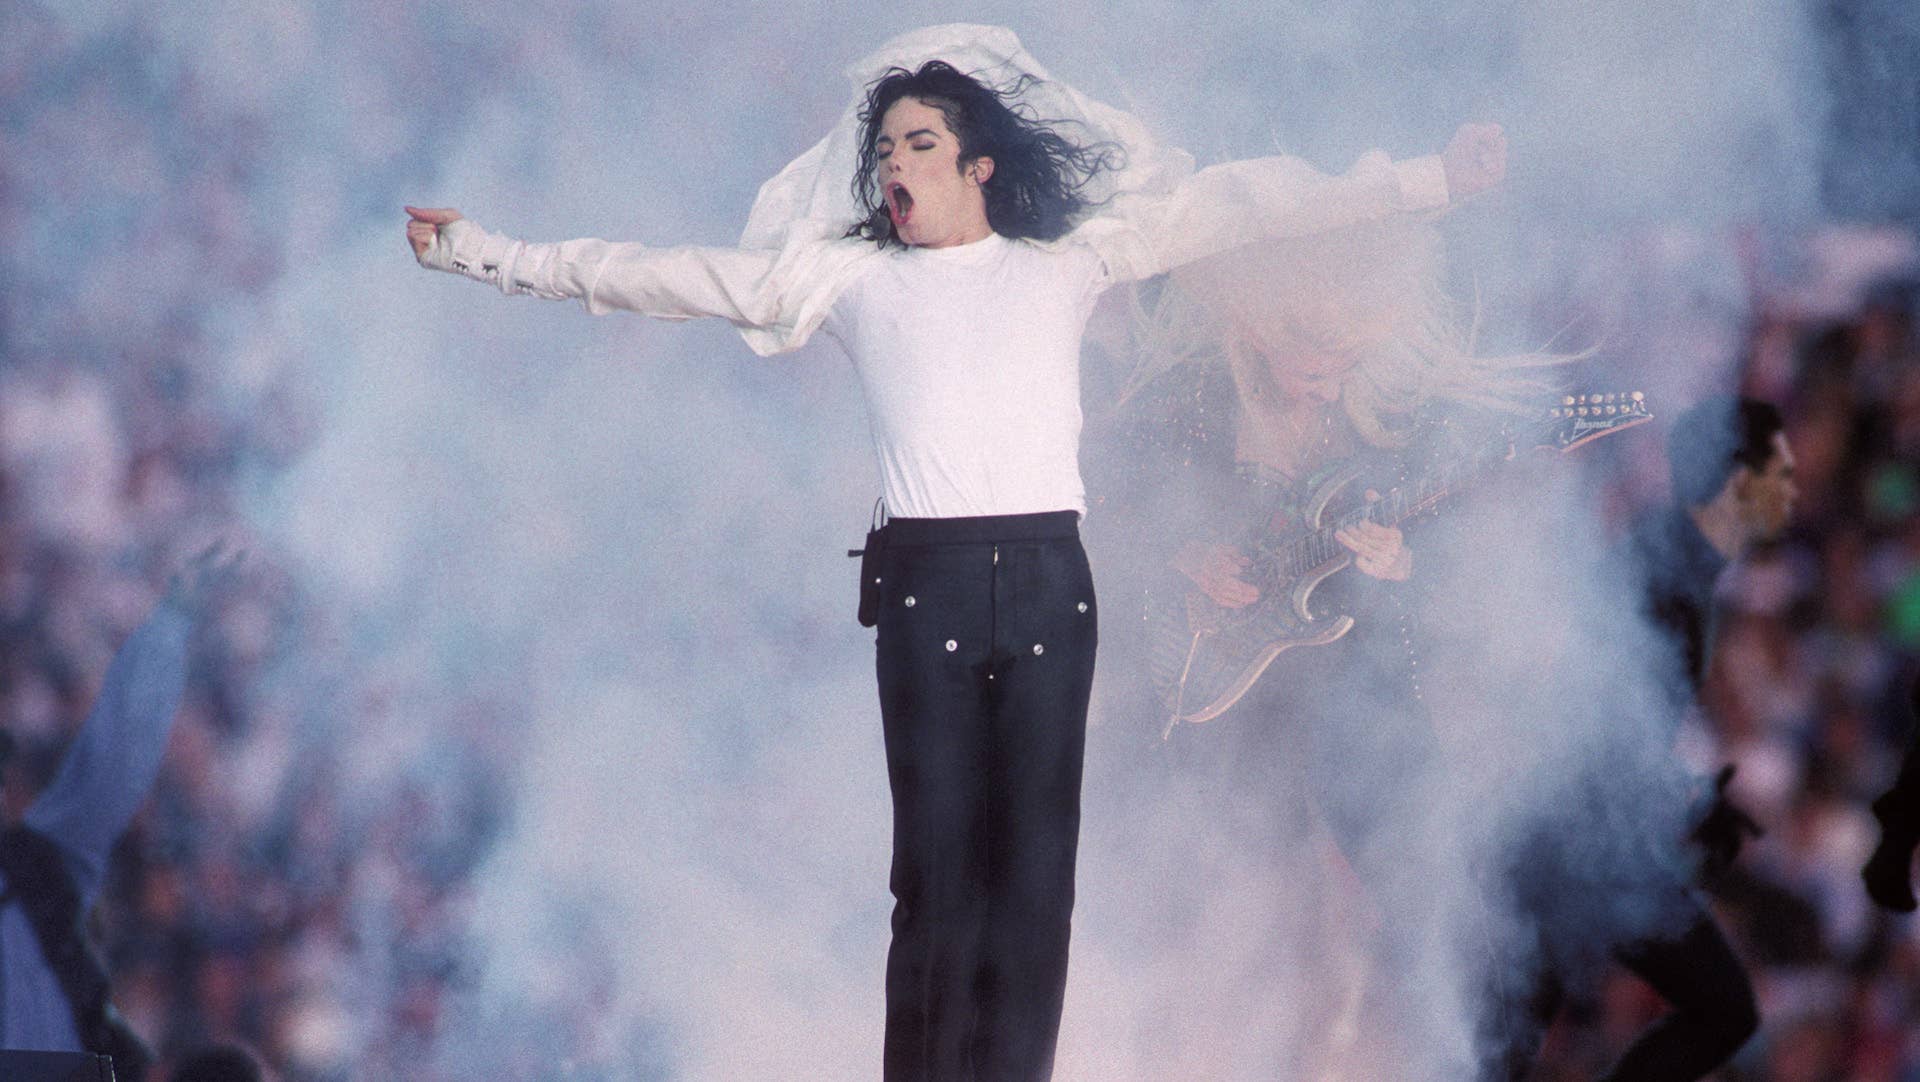 Michael Jackson performs at the Super Bowl Halftime Show